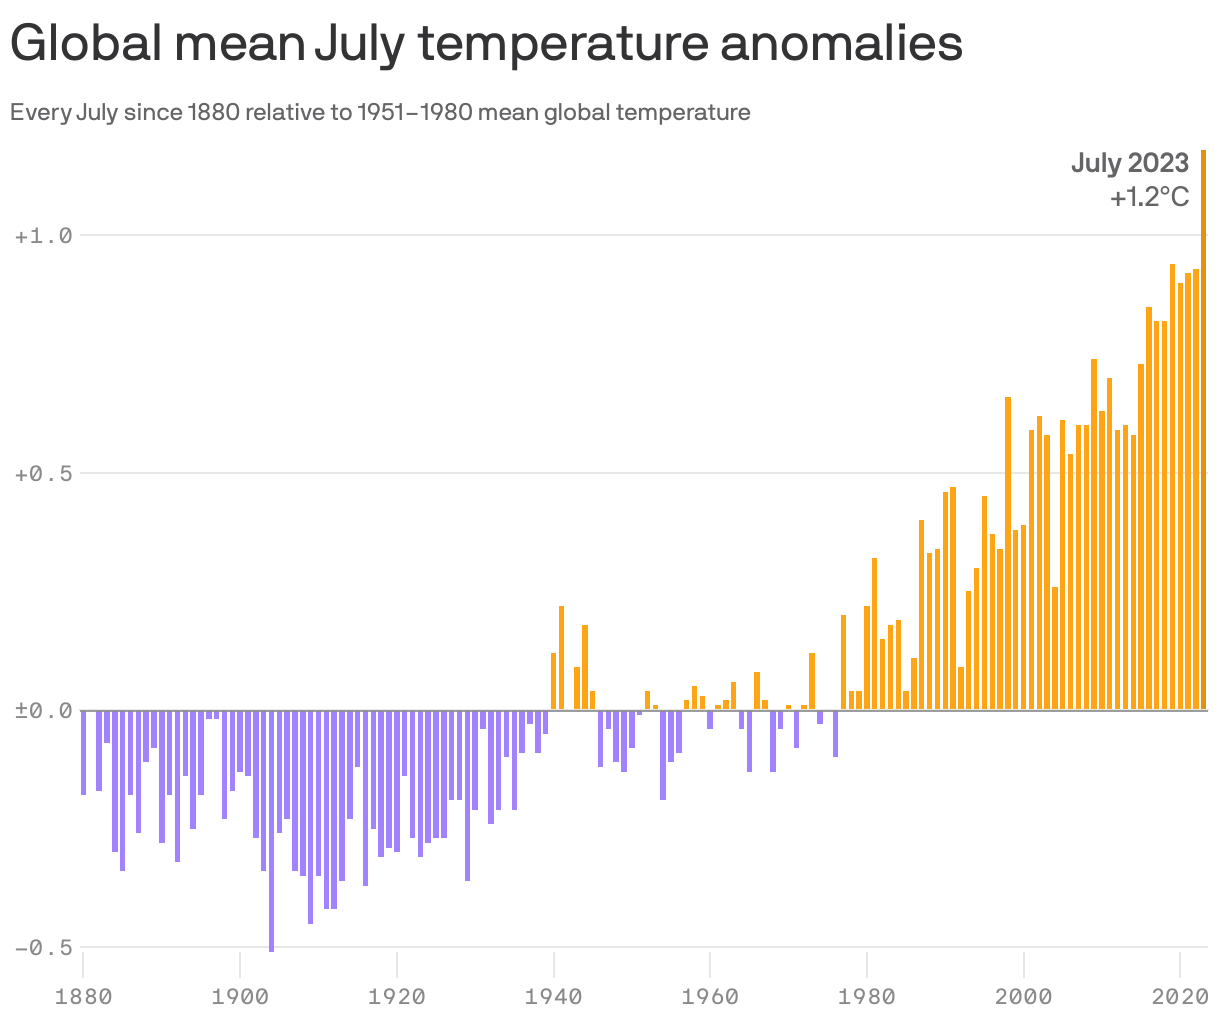 Global mean July temperature anomalies